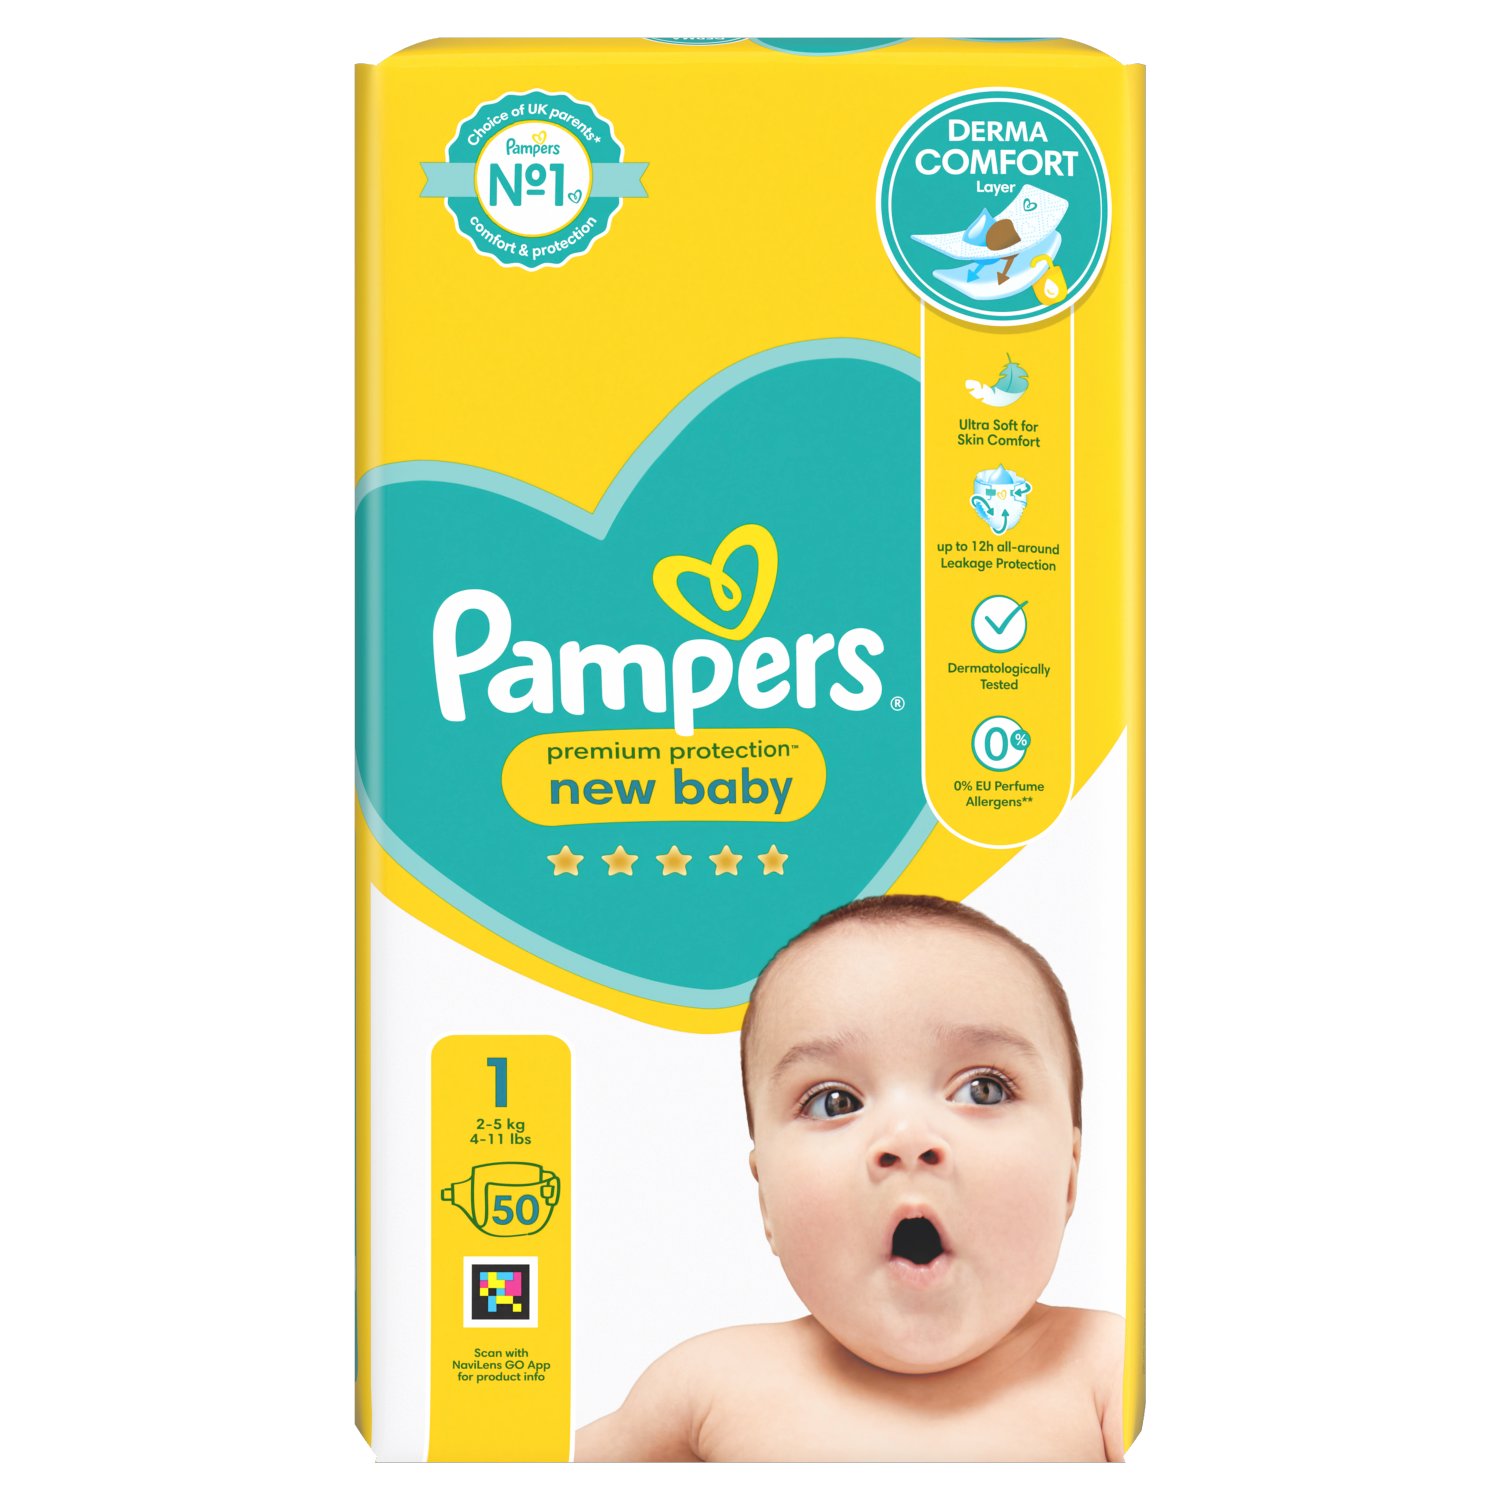 Pampers New Baby Size 1 Nappies (50 Piece)